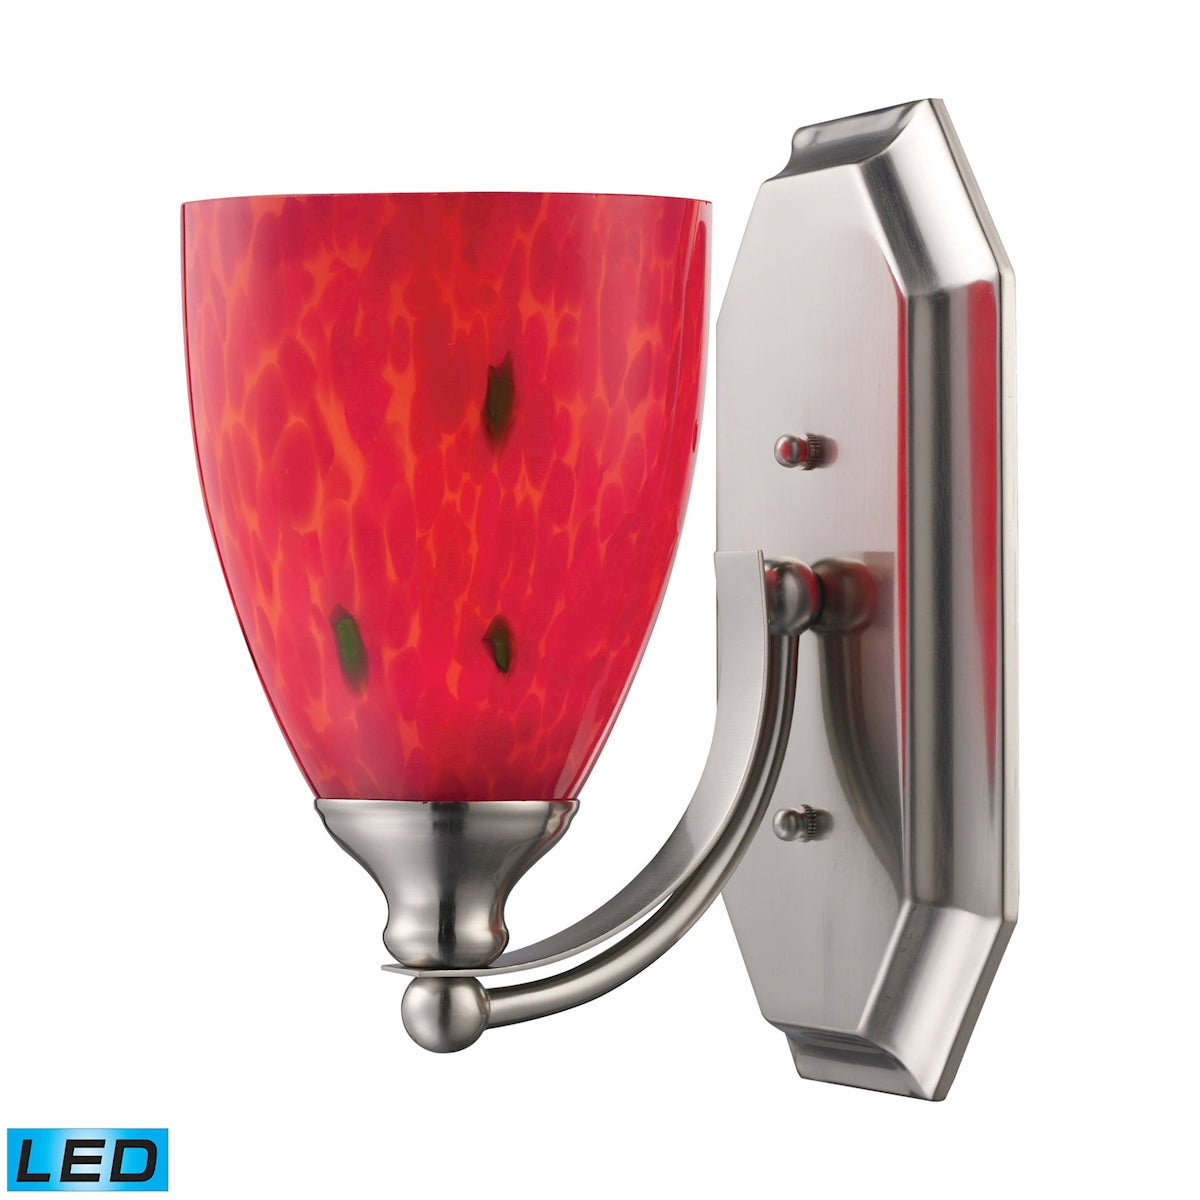 ELK Lighting 570-1N-FR-LED Mix-N-Match Vanity 1-Light Wall Lamp in Satin Nickel with Fire Red Glass - Includes LED Bulb